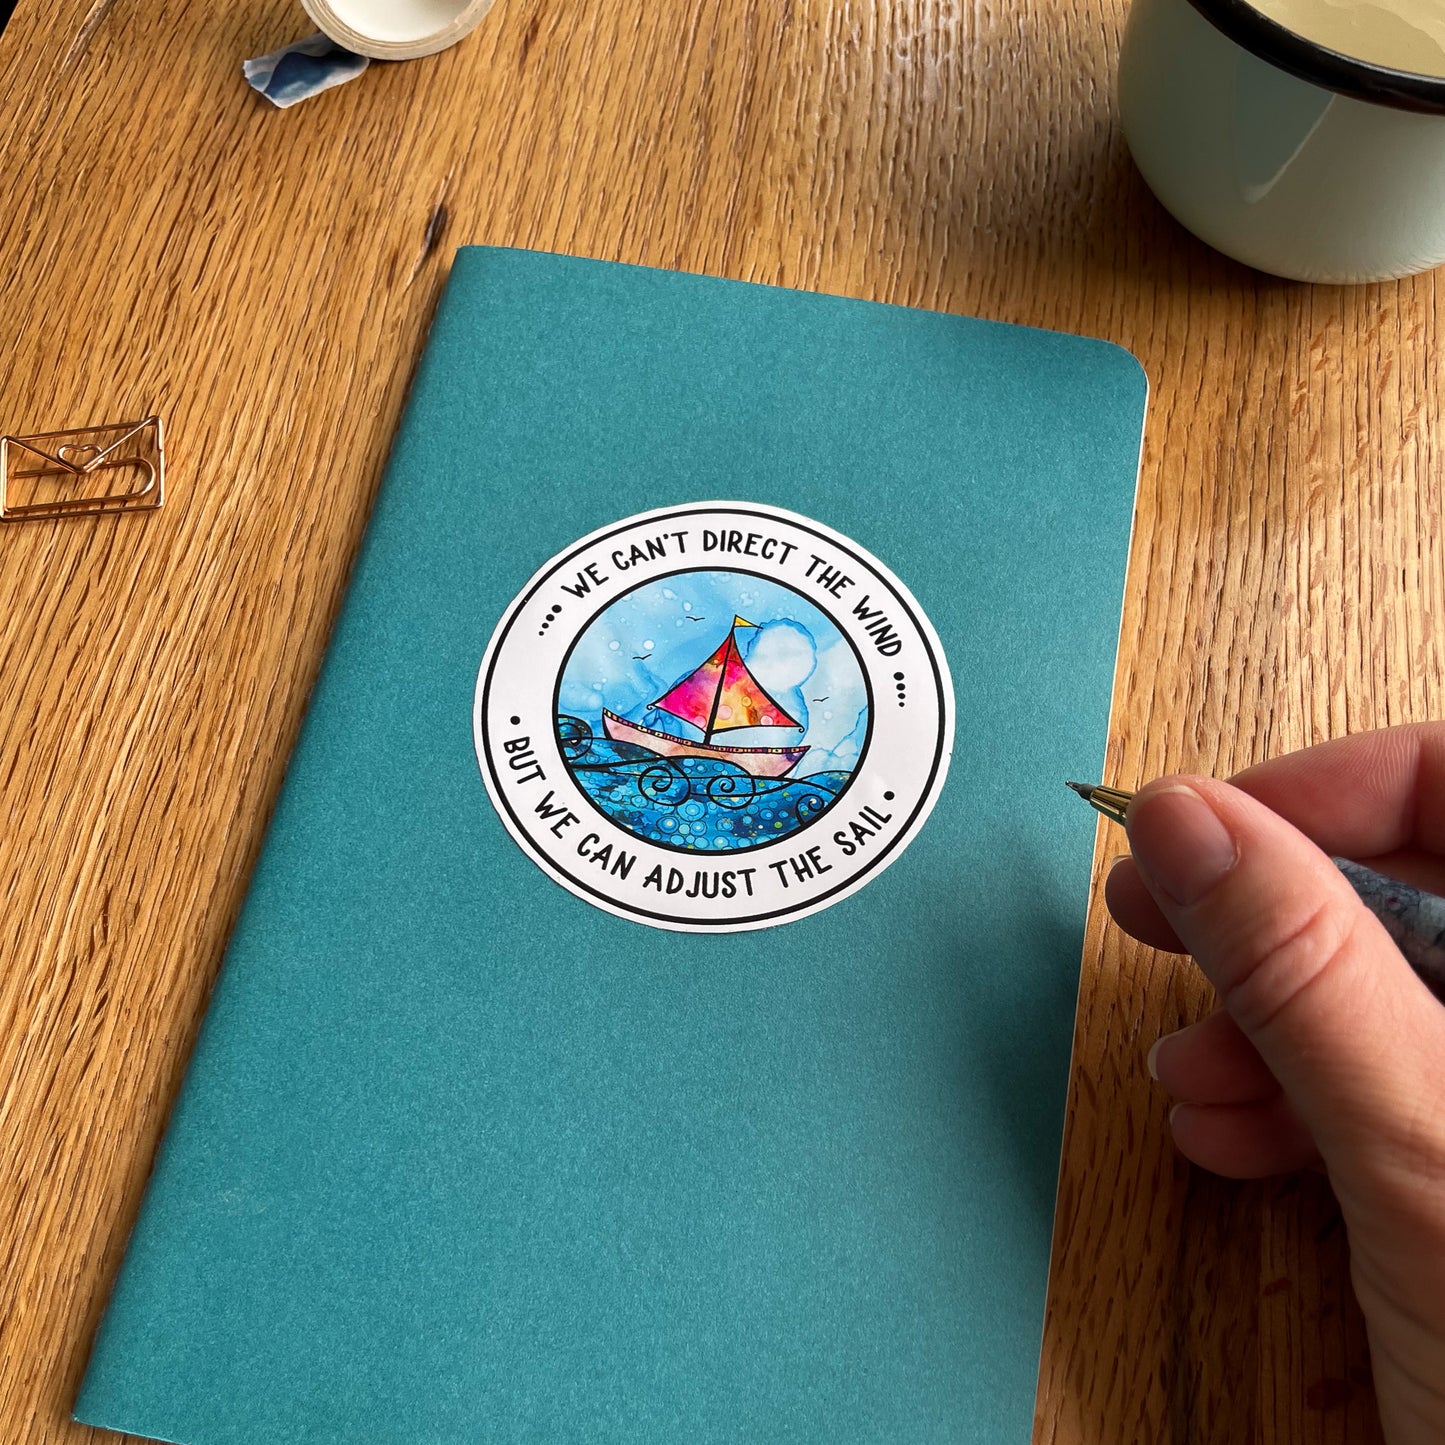 Motivating sailboat design vinyl sticker - a visual boost of hope and motivation when you need it most.